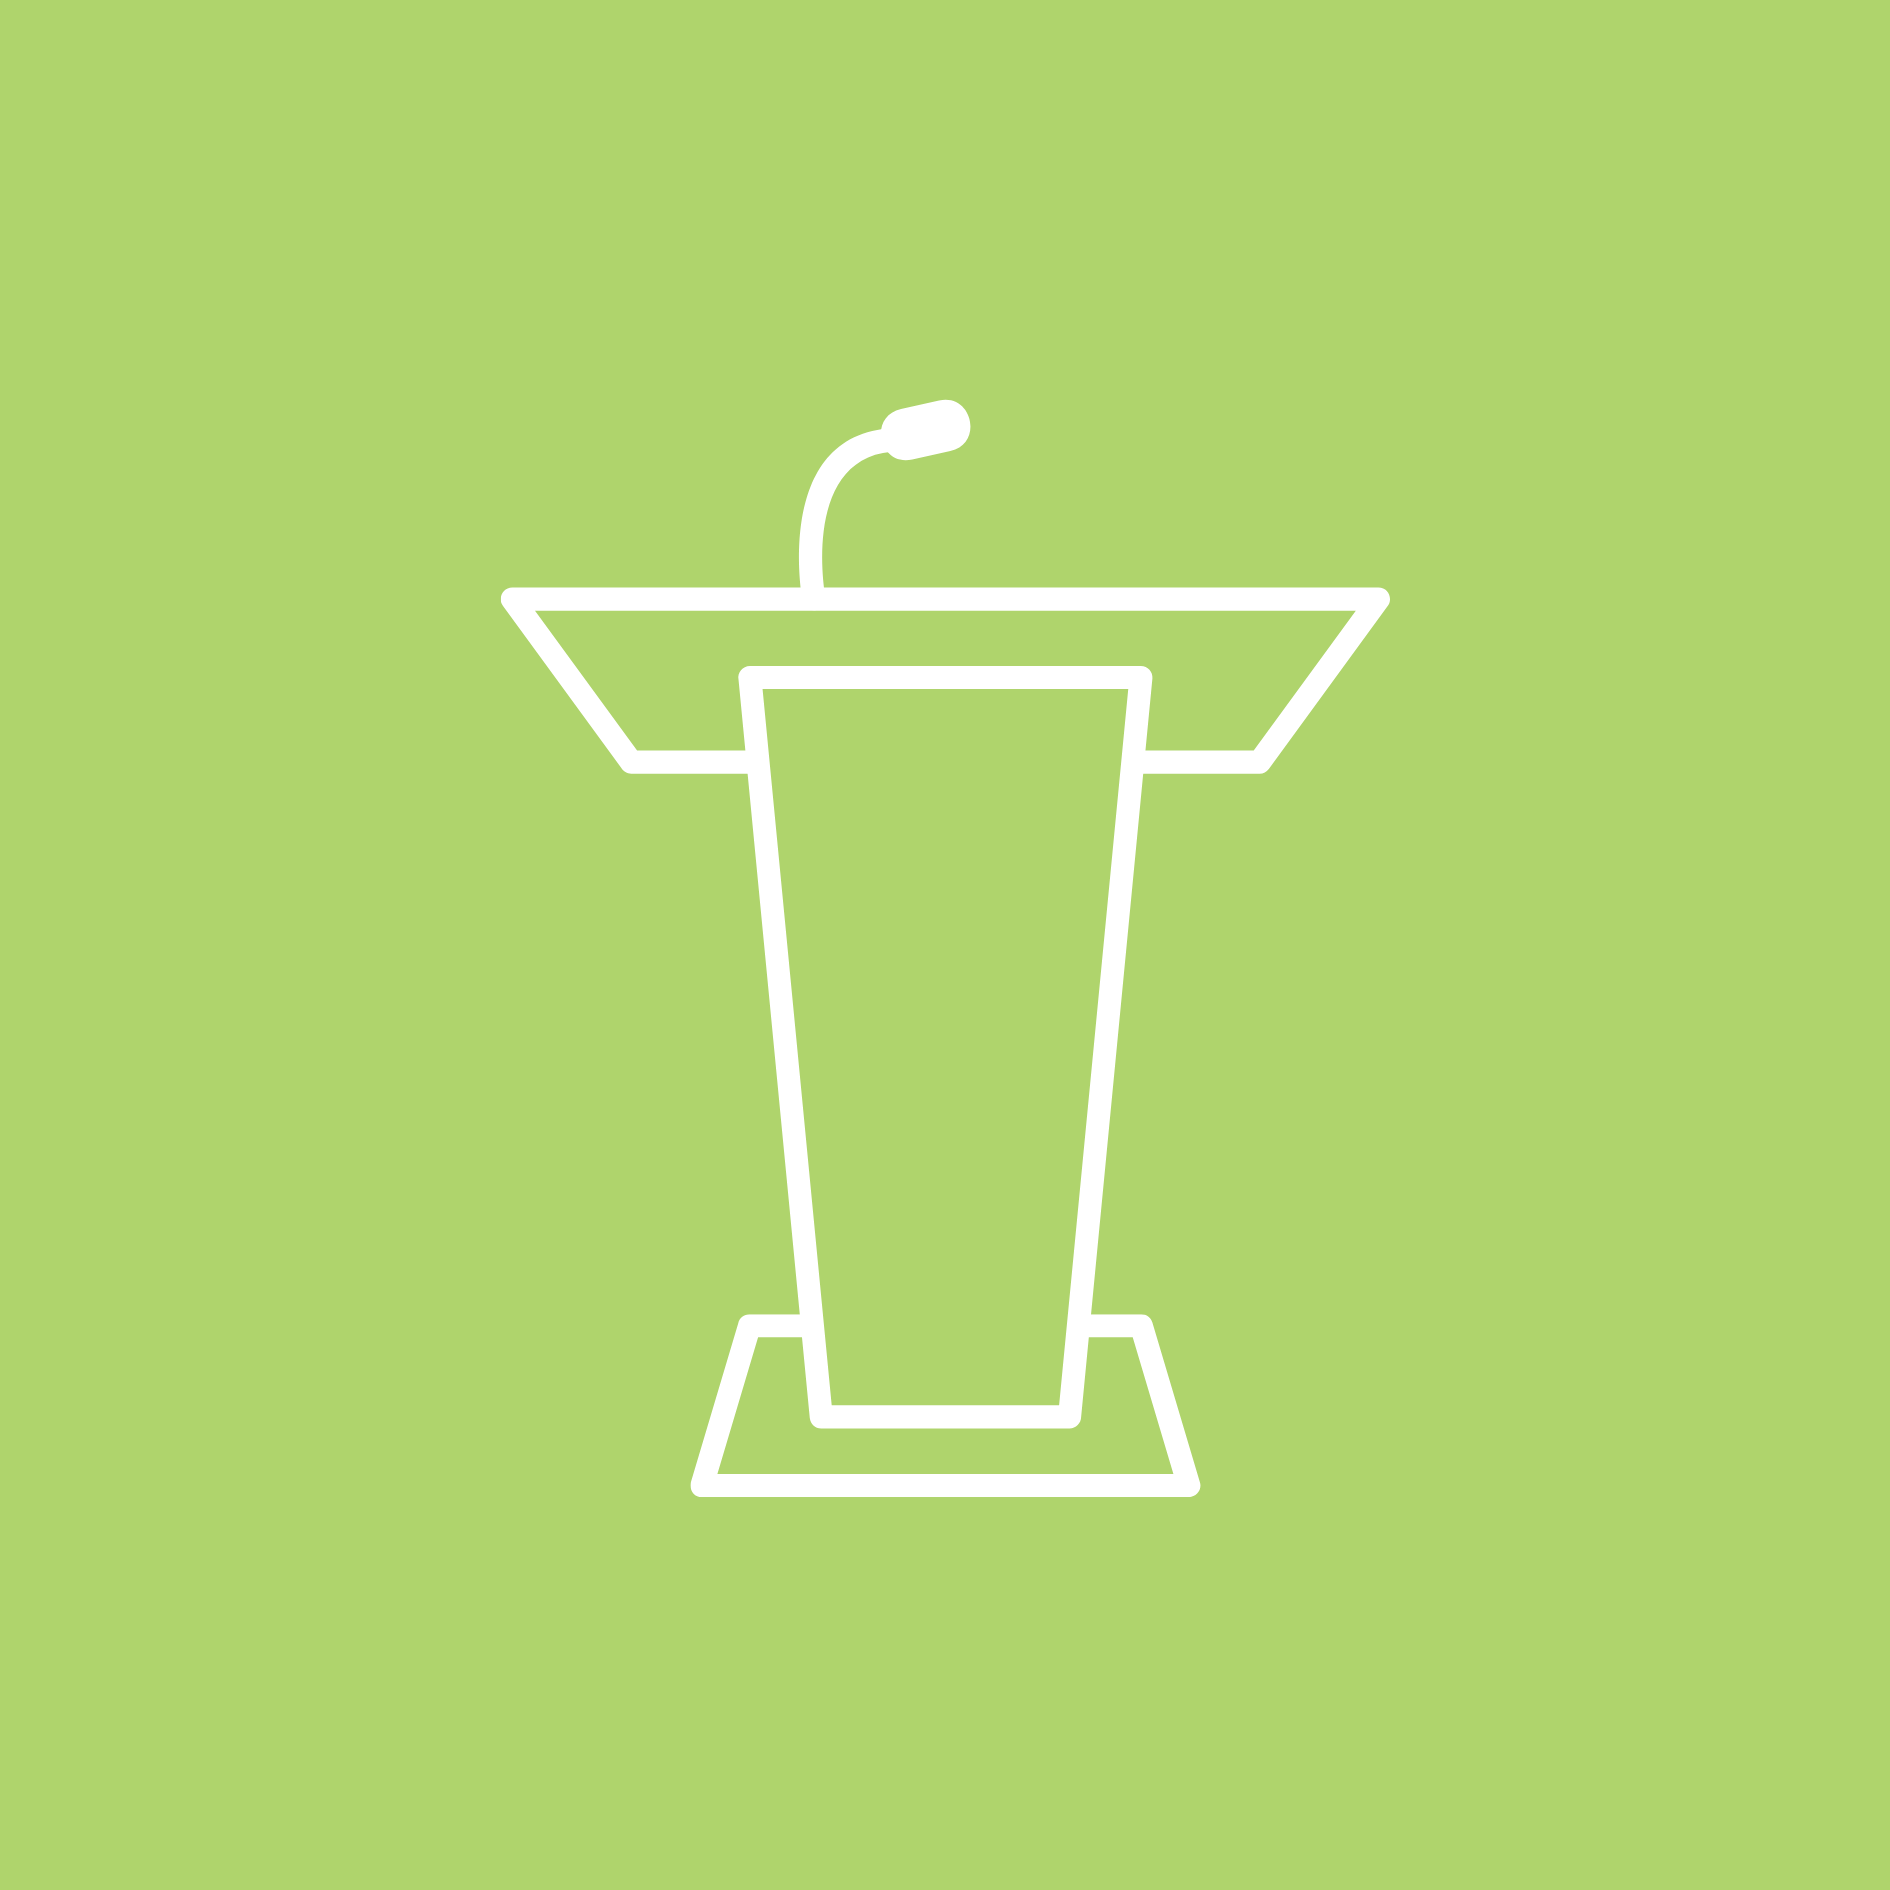 A white line icon of a podium with a microphone on a green background.